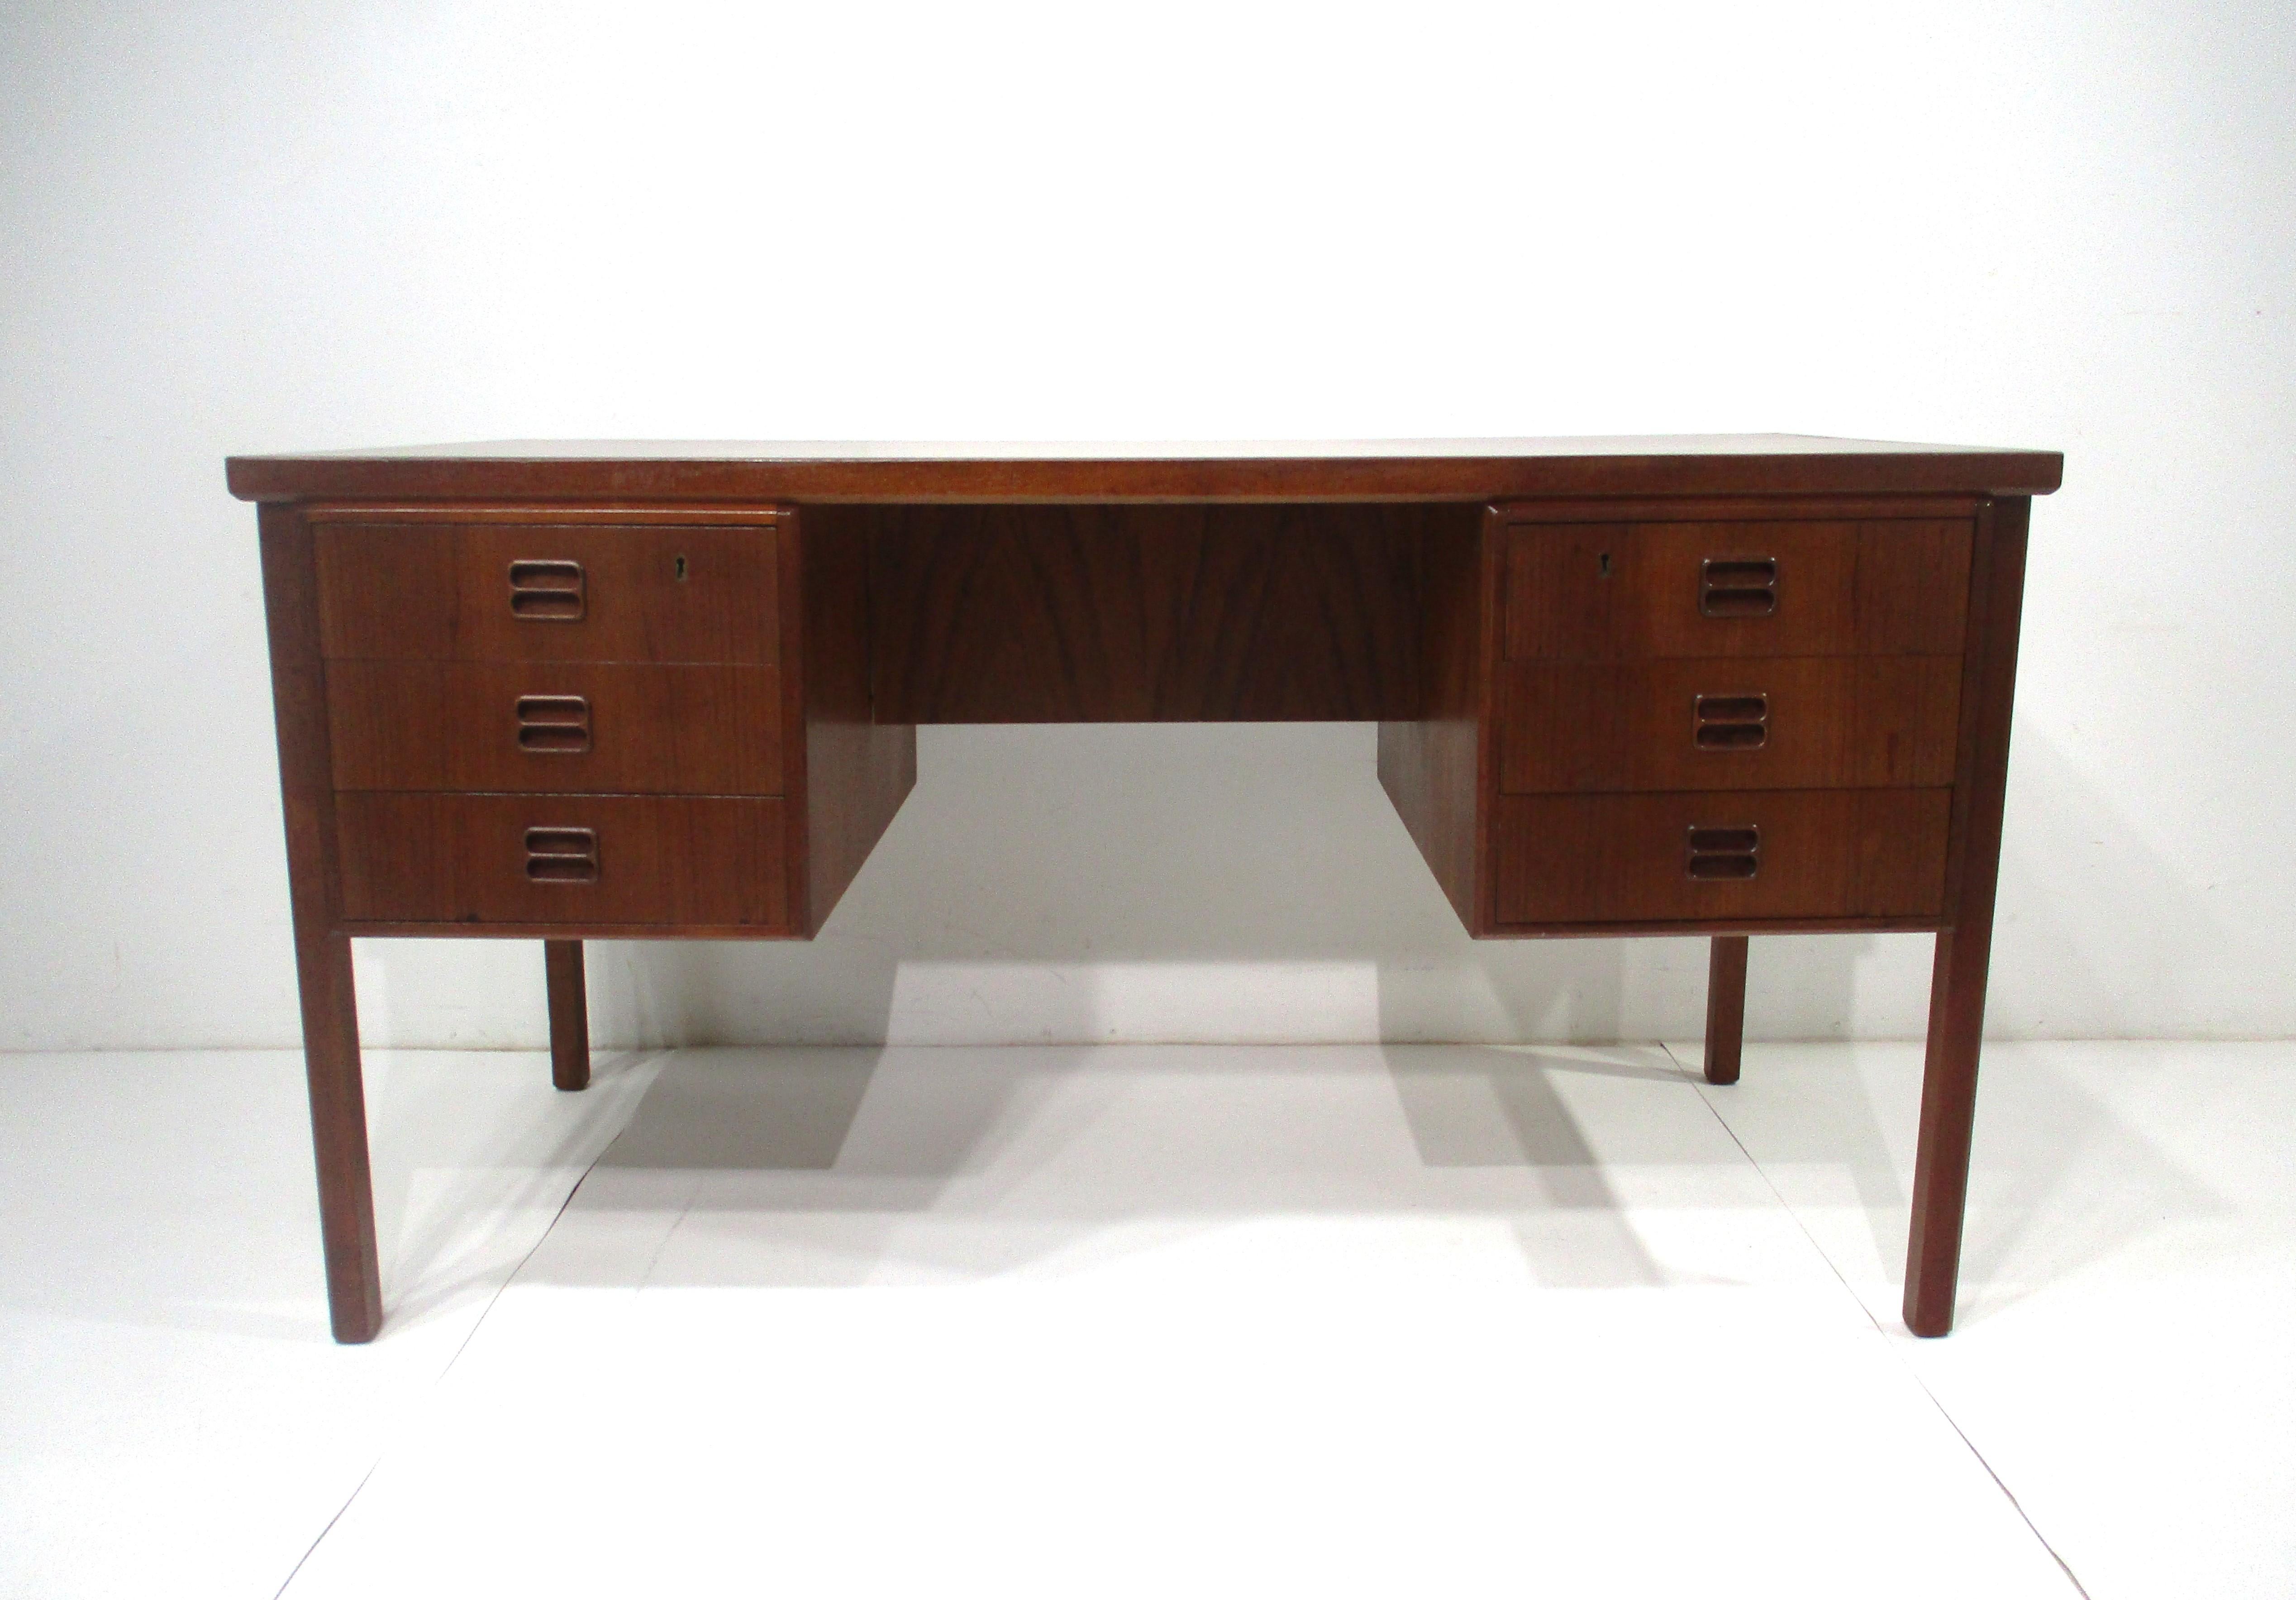 A dark teakwood executive desk with three drawers to each side and inset finger pulls to the fronts, the back side has two small bookcase cubies . The perfect desk for home or office because of it's European scale which is smaller that the American